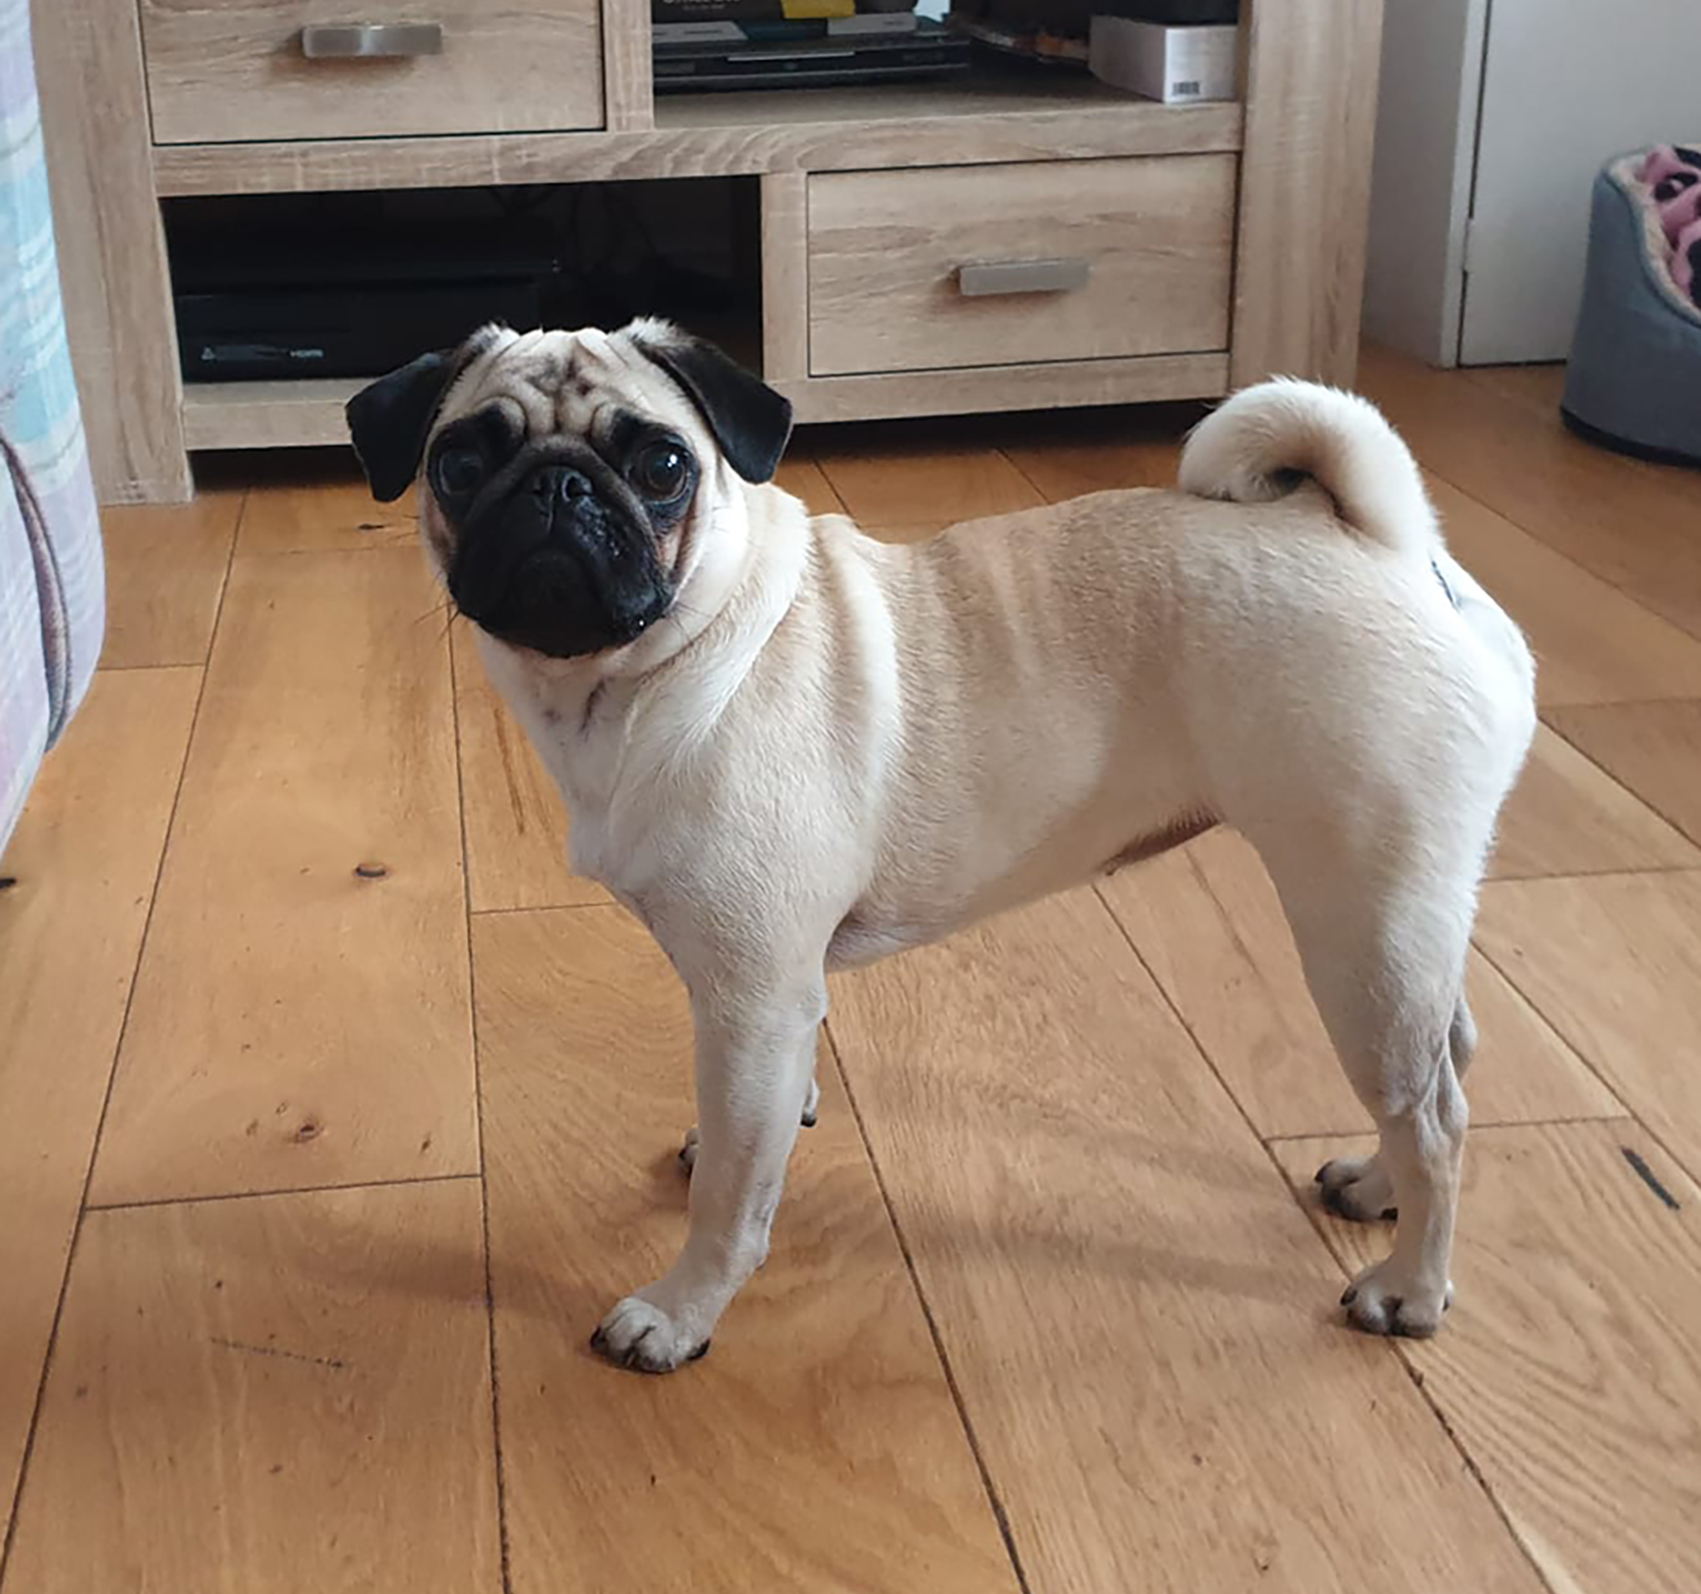 Wheels for Maisy - image Susie on https://pugprotectiontrust.org